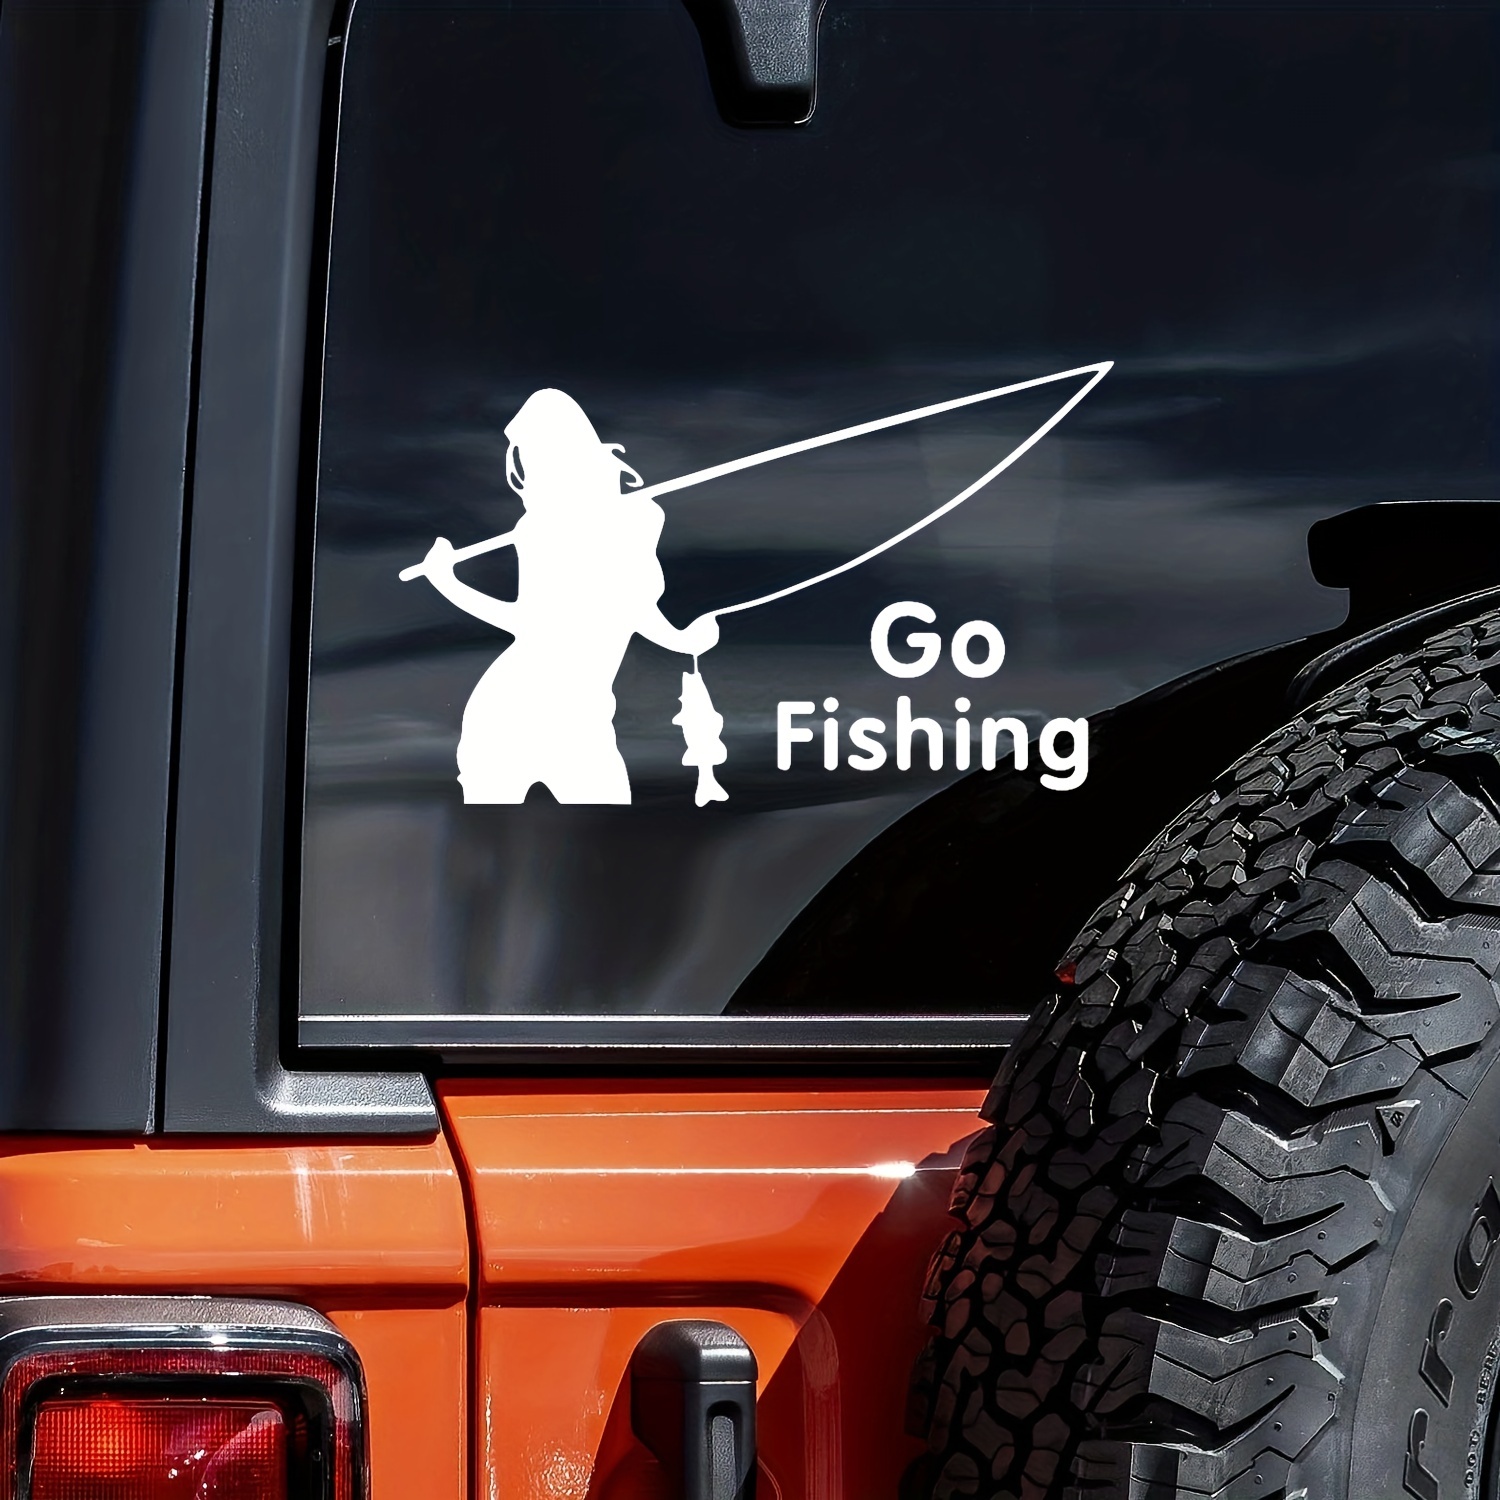 1Pc, GO FISHING Sticker, Beauty Fishing Decorative Stickers, Car Door,  Window & Bumper Stickers, Waterproof Car Scratch Cover Stickers, For Cars